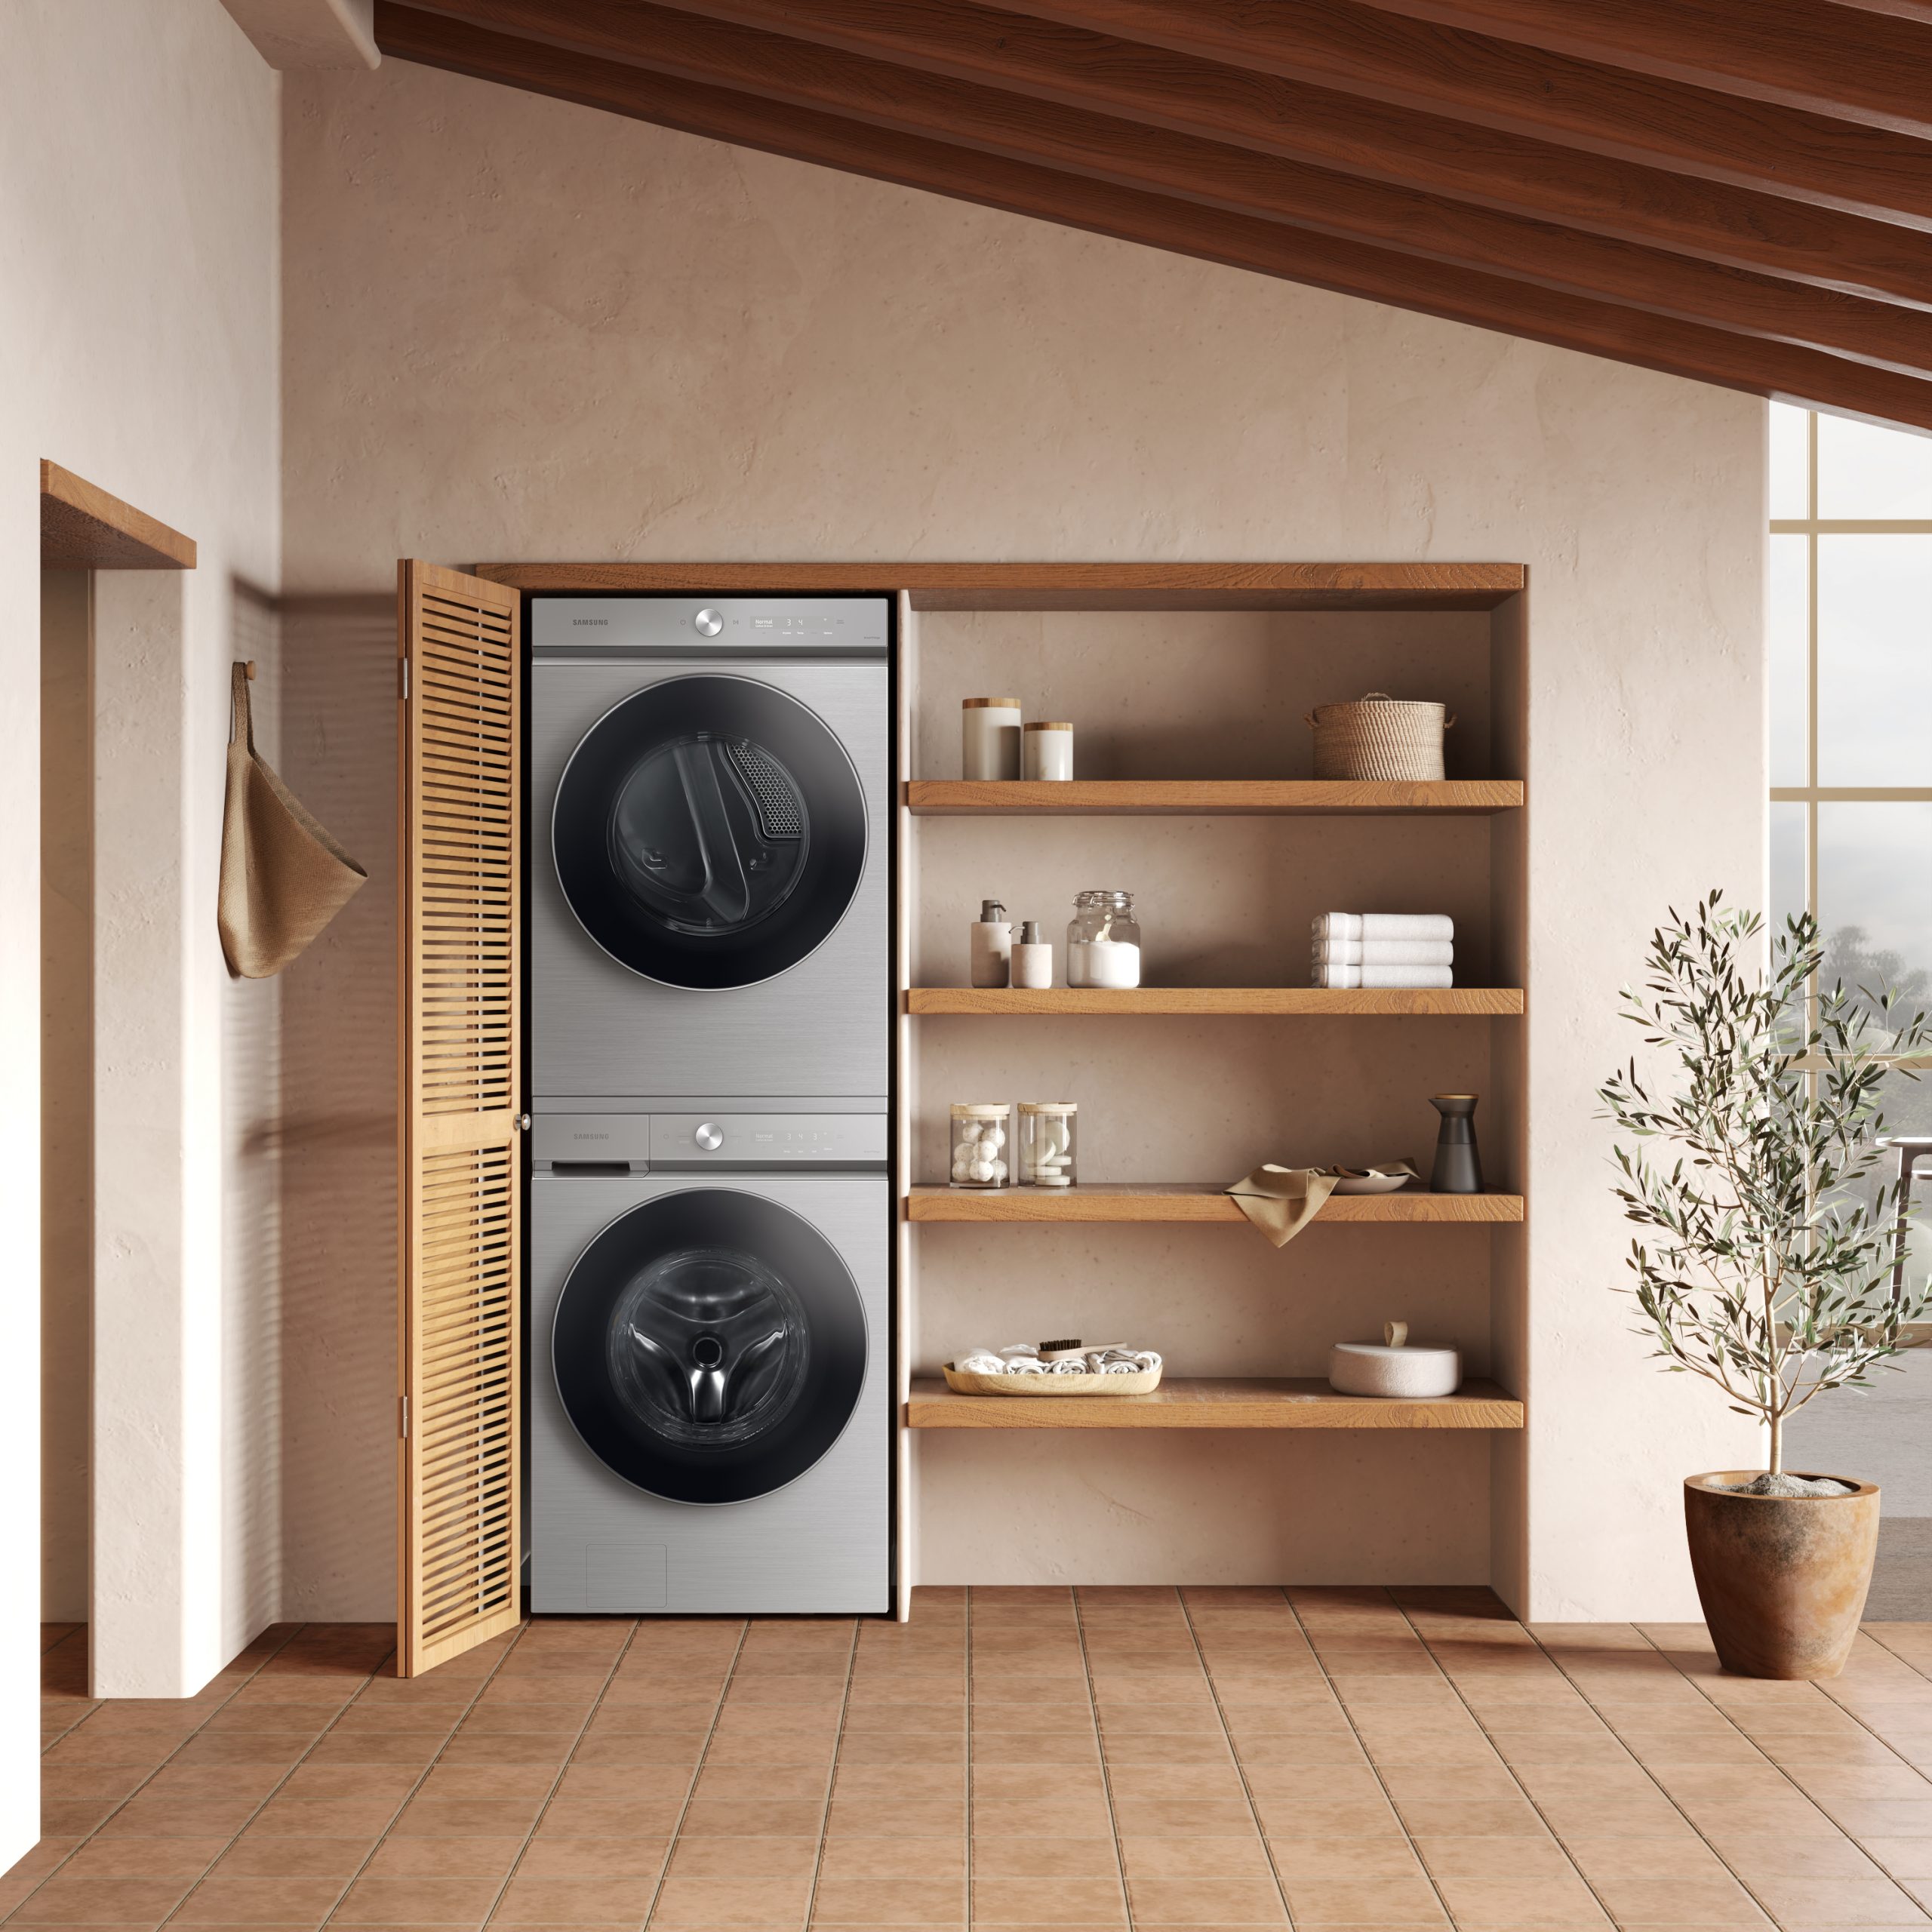 Samsung's new AI-powered Bespoke Washer and Dryer